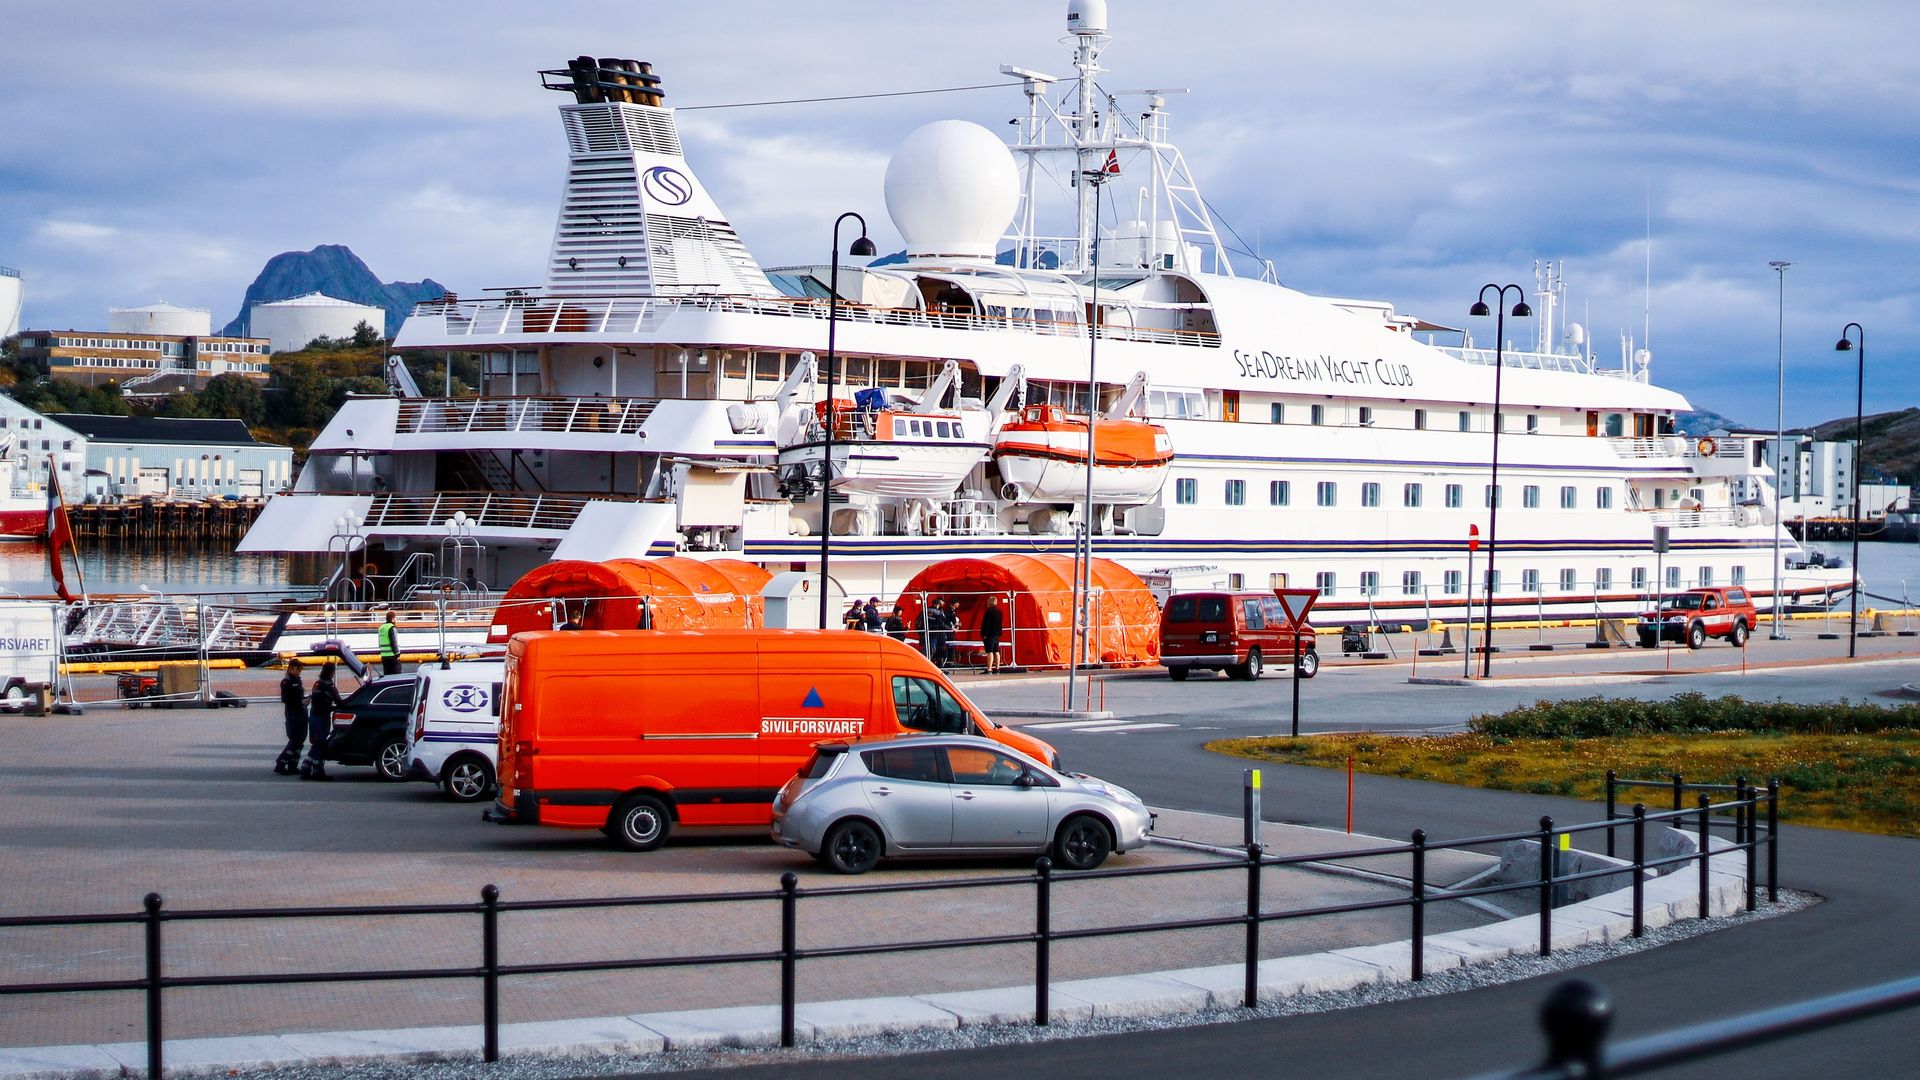 SeaDream cruise ship in Norway